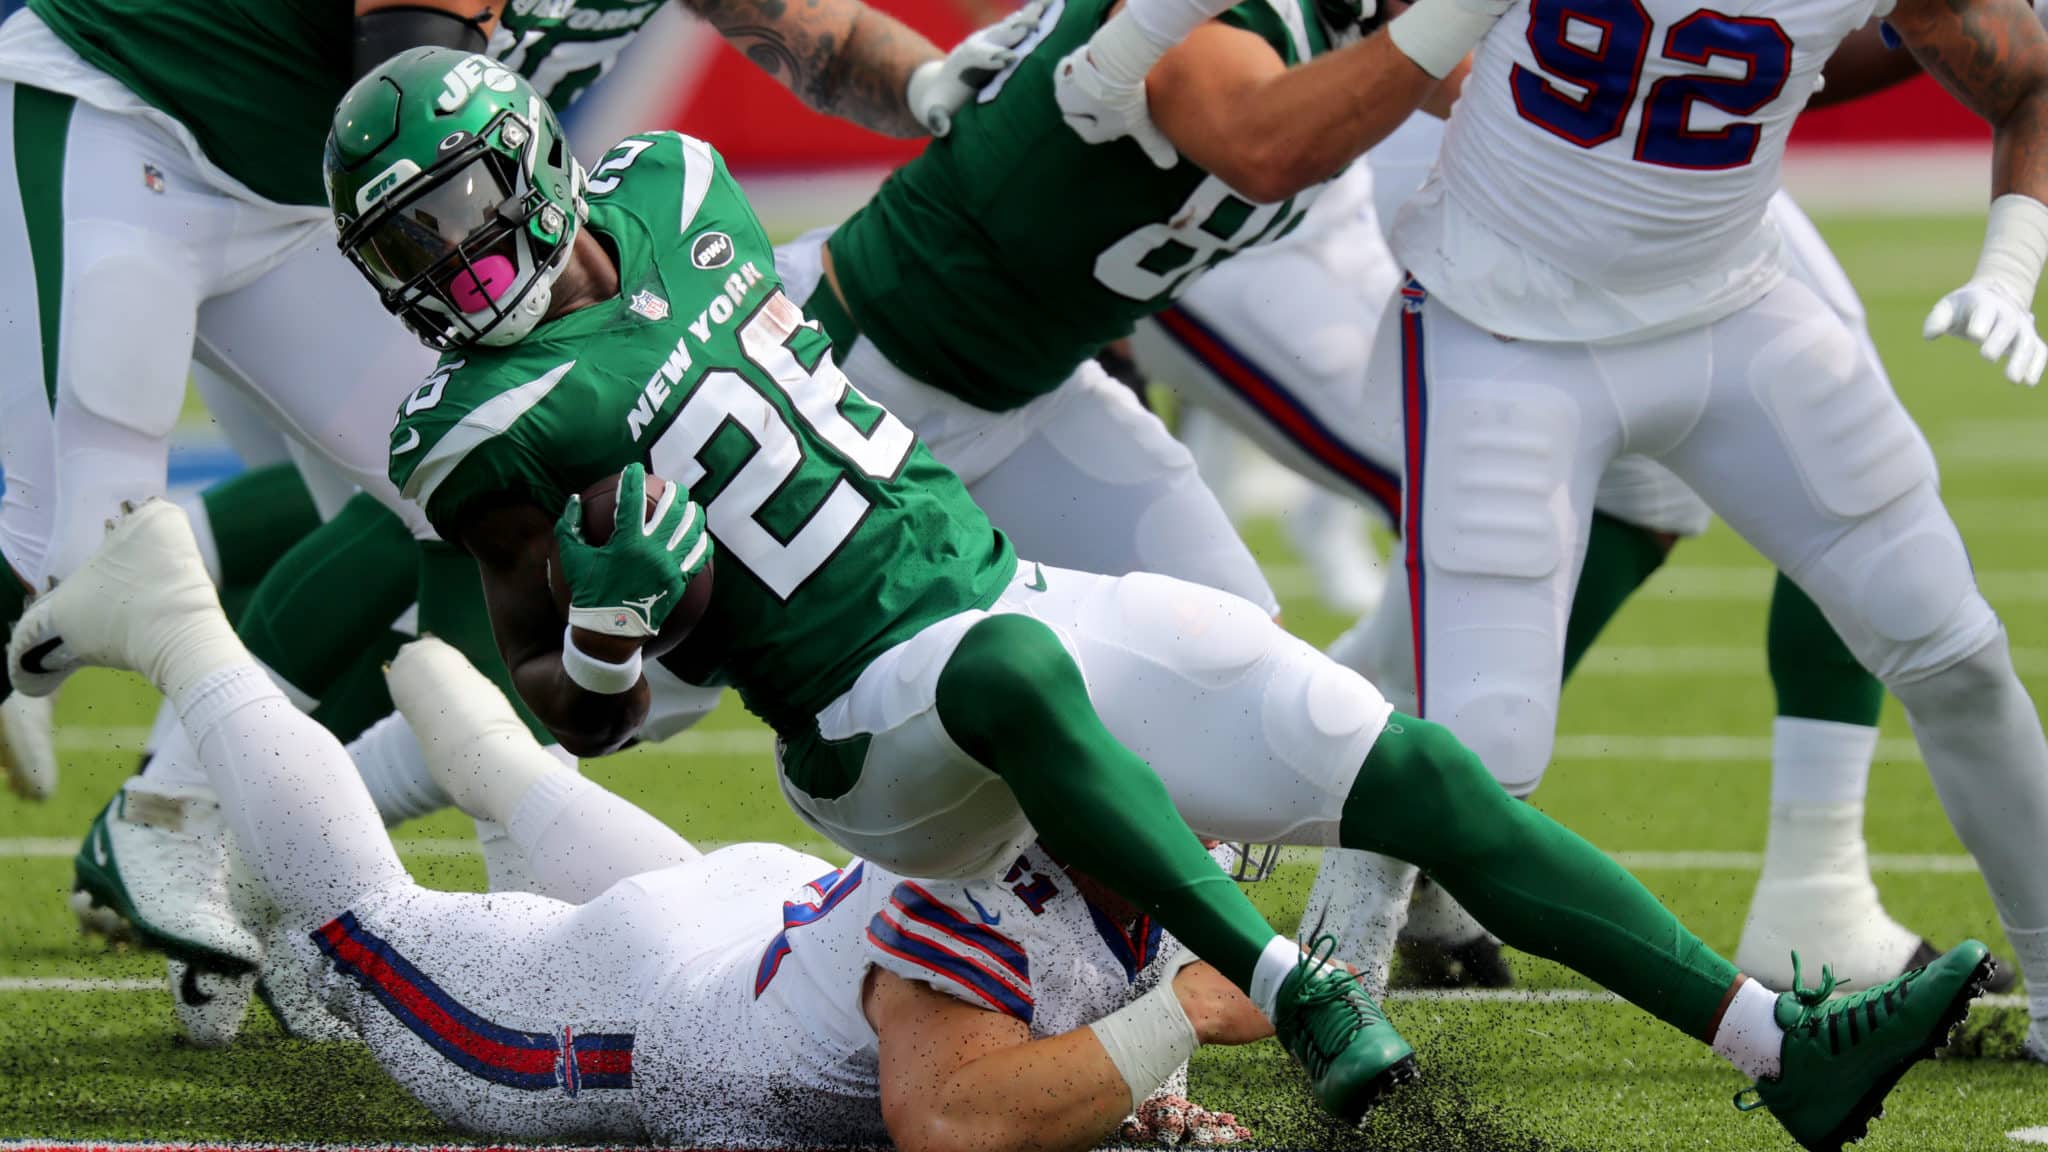 ORCHARD PARK, NY - SEPTEMBER 13: Justin Zimmer #61 of the Buffalo Bills dives to make a tackle on Le'Veon Bell #26 of the New York Jets during the first quarter at Bills Stadium on September 13, 2020 in Orchard Park, New York.